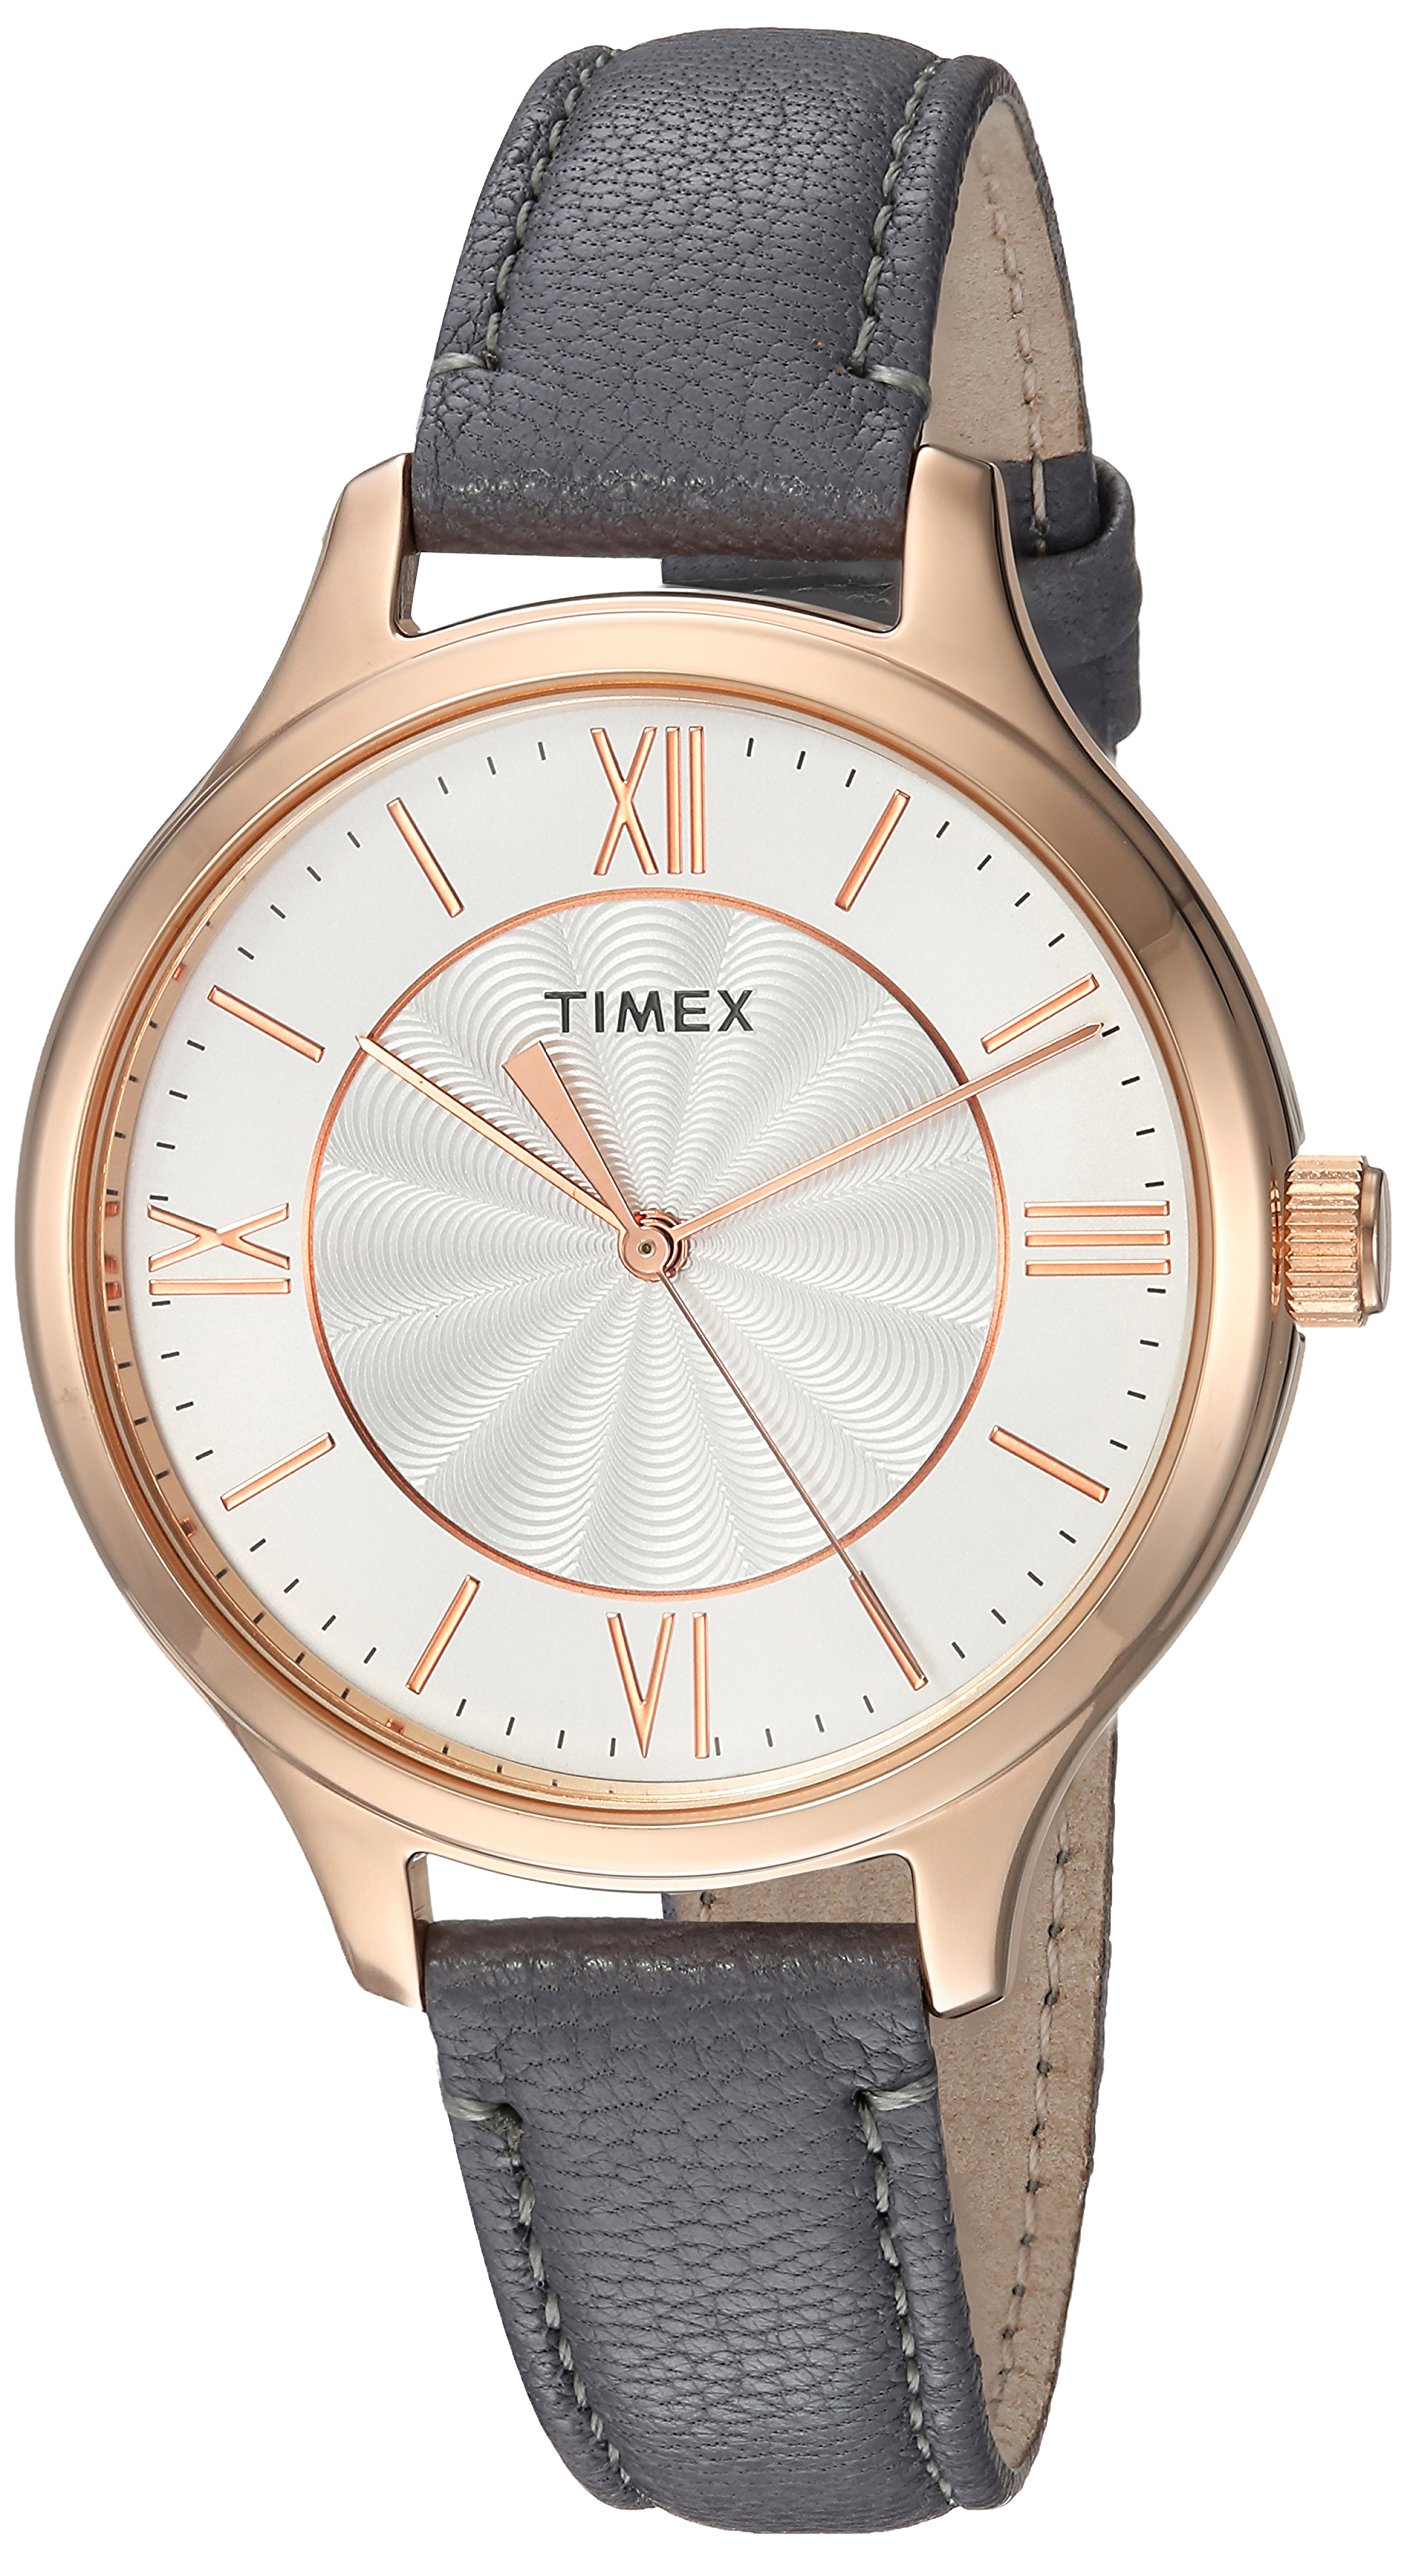 Timex Women's Peyton Rose Gold-Tone Watch, Gray Leather Strap - image 1 of 4